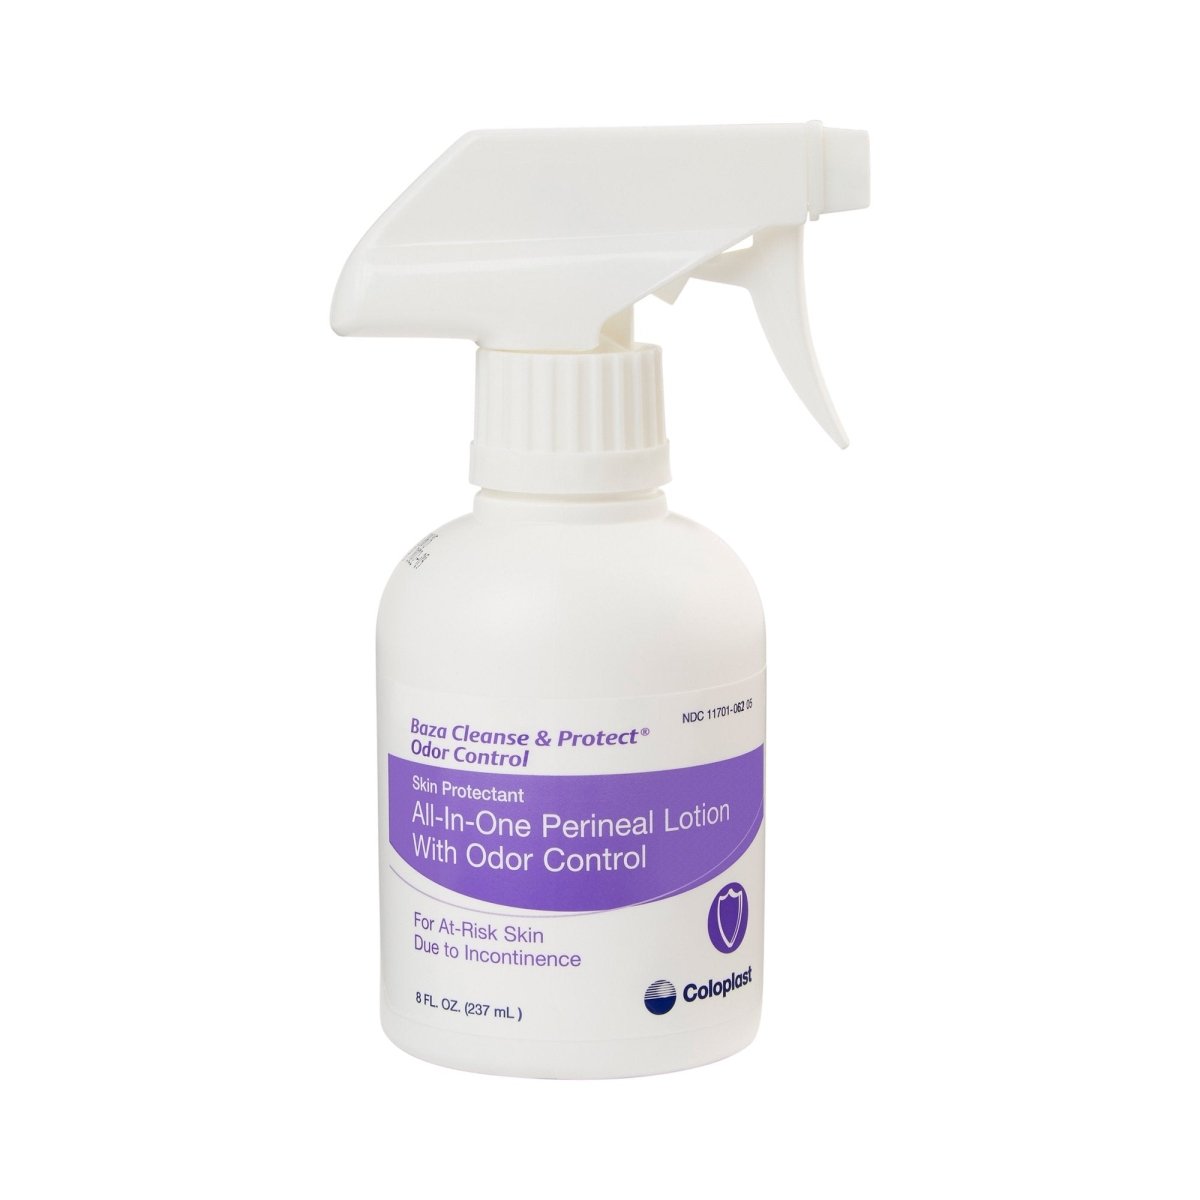 Baza Cleanse and Protect with Odor Control Perineal Wash, 8 oz. Spray Pump Bottle - 468904_EA - 2